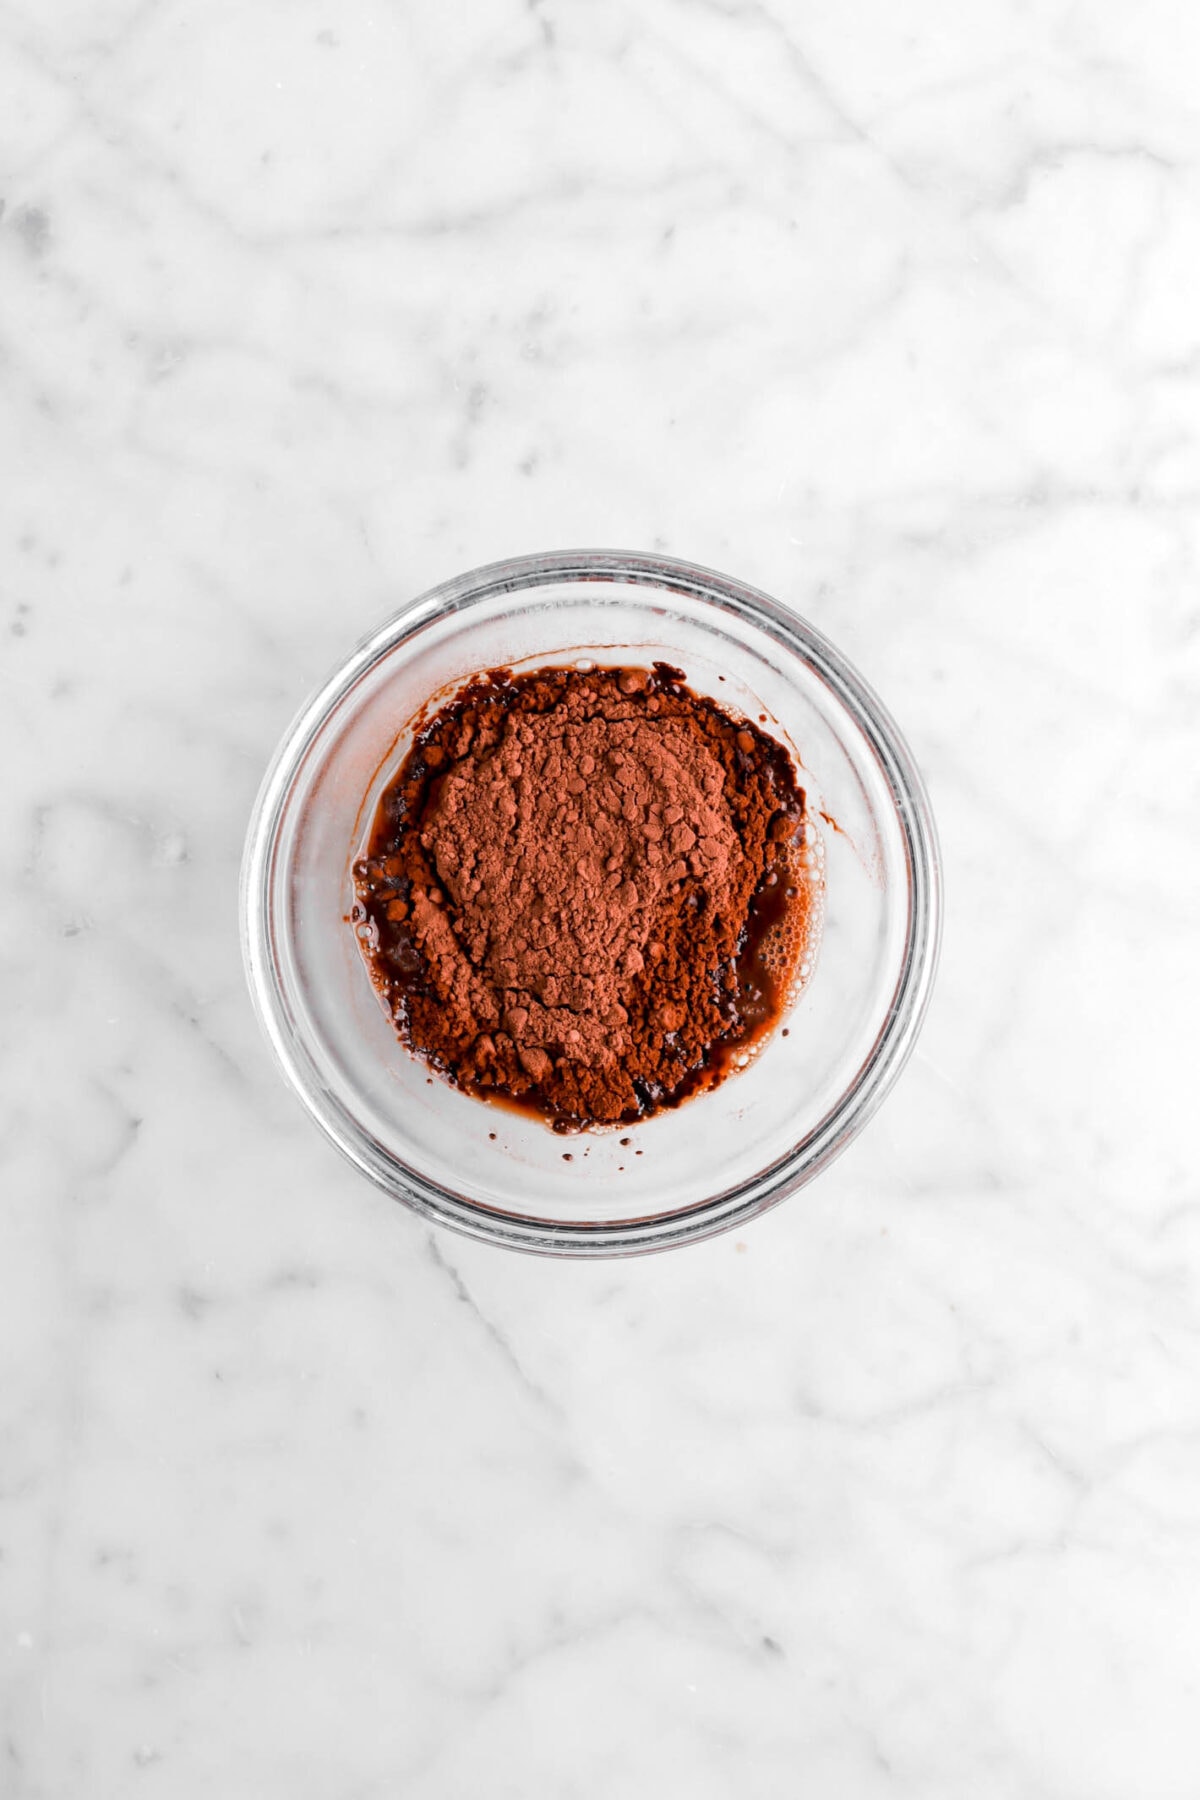 cocoa powder and water in small glass bowl